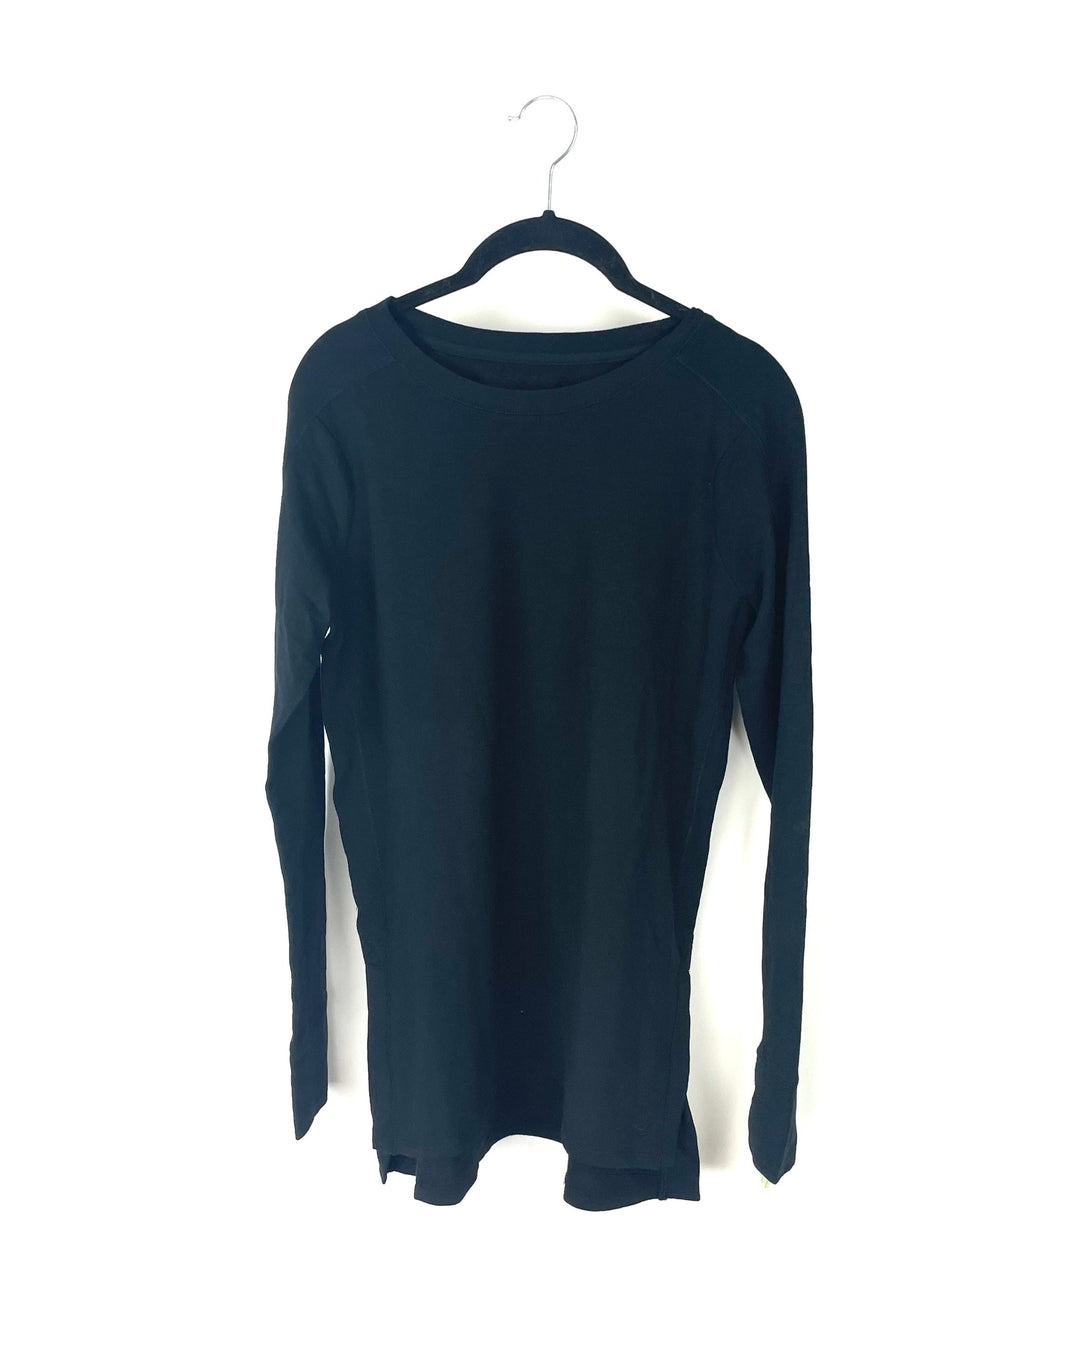 Black Long Sleeve Top - Small and 2XL